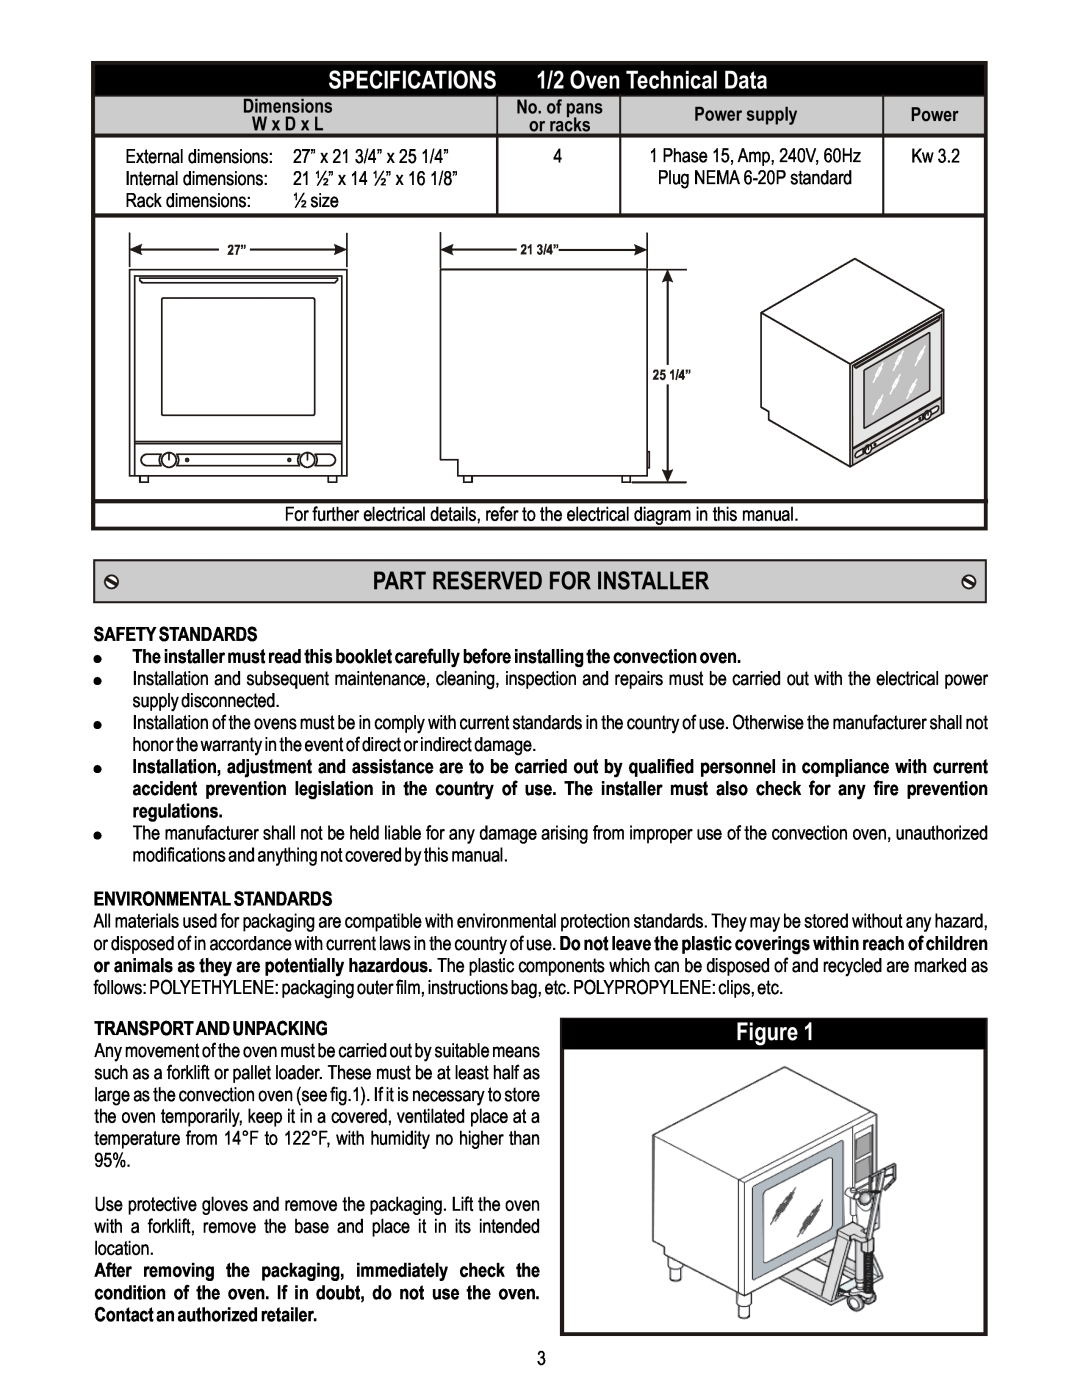 APW HSO-200 manual 1/2 Oven Technical Data, Part Reserved For Installer, Specifications, Power supply, Safety Standards 